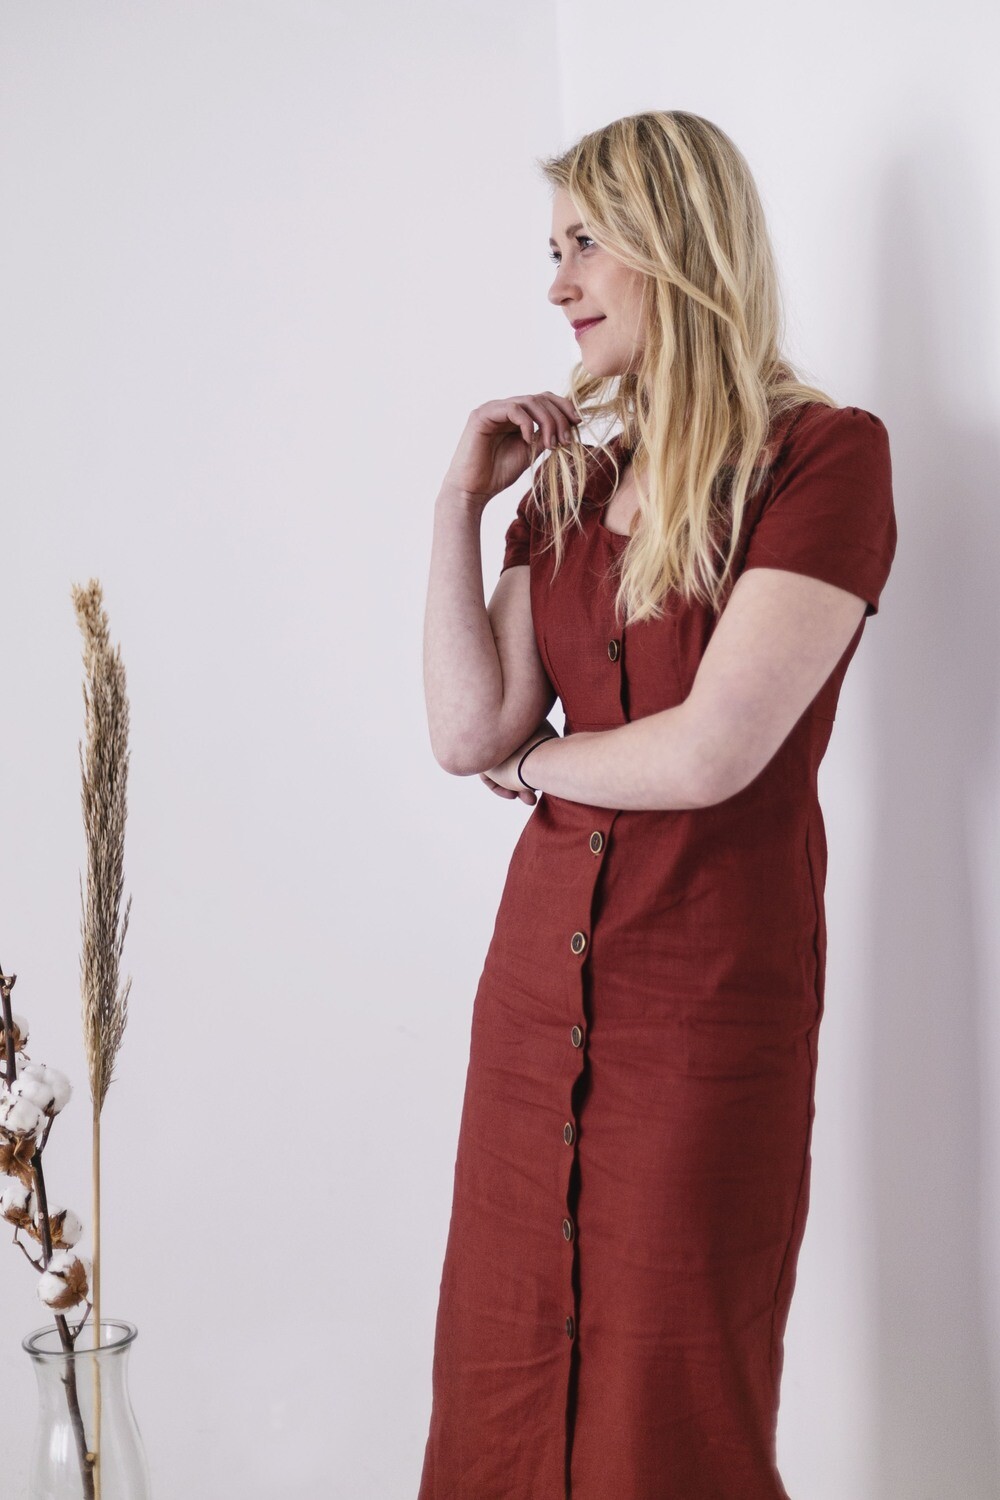 Olá Lindeza | Linen dress with wooden buttons - maroon red - 100% natural linen